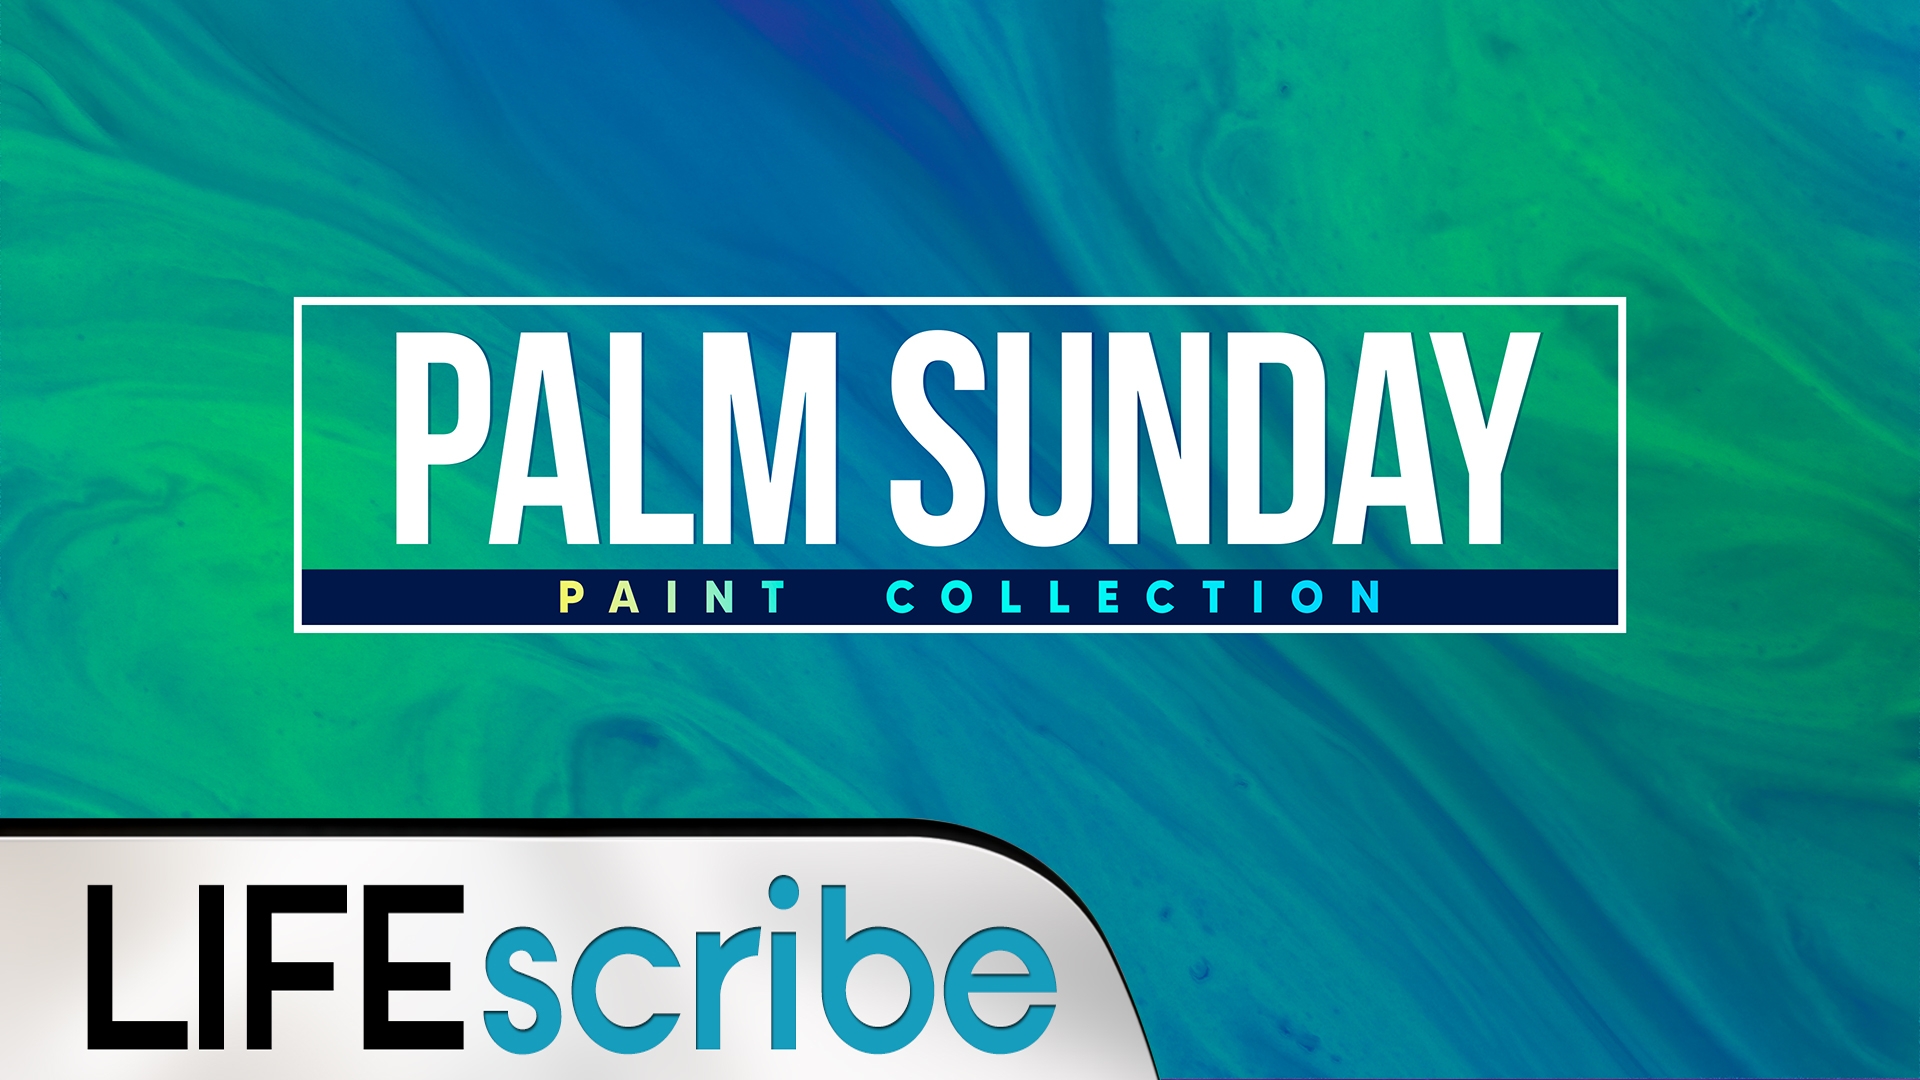 Palm Sunday Paint Collection